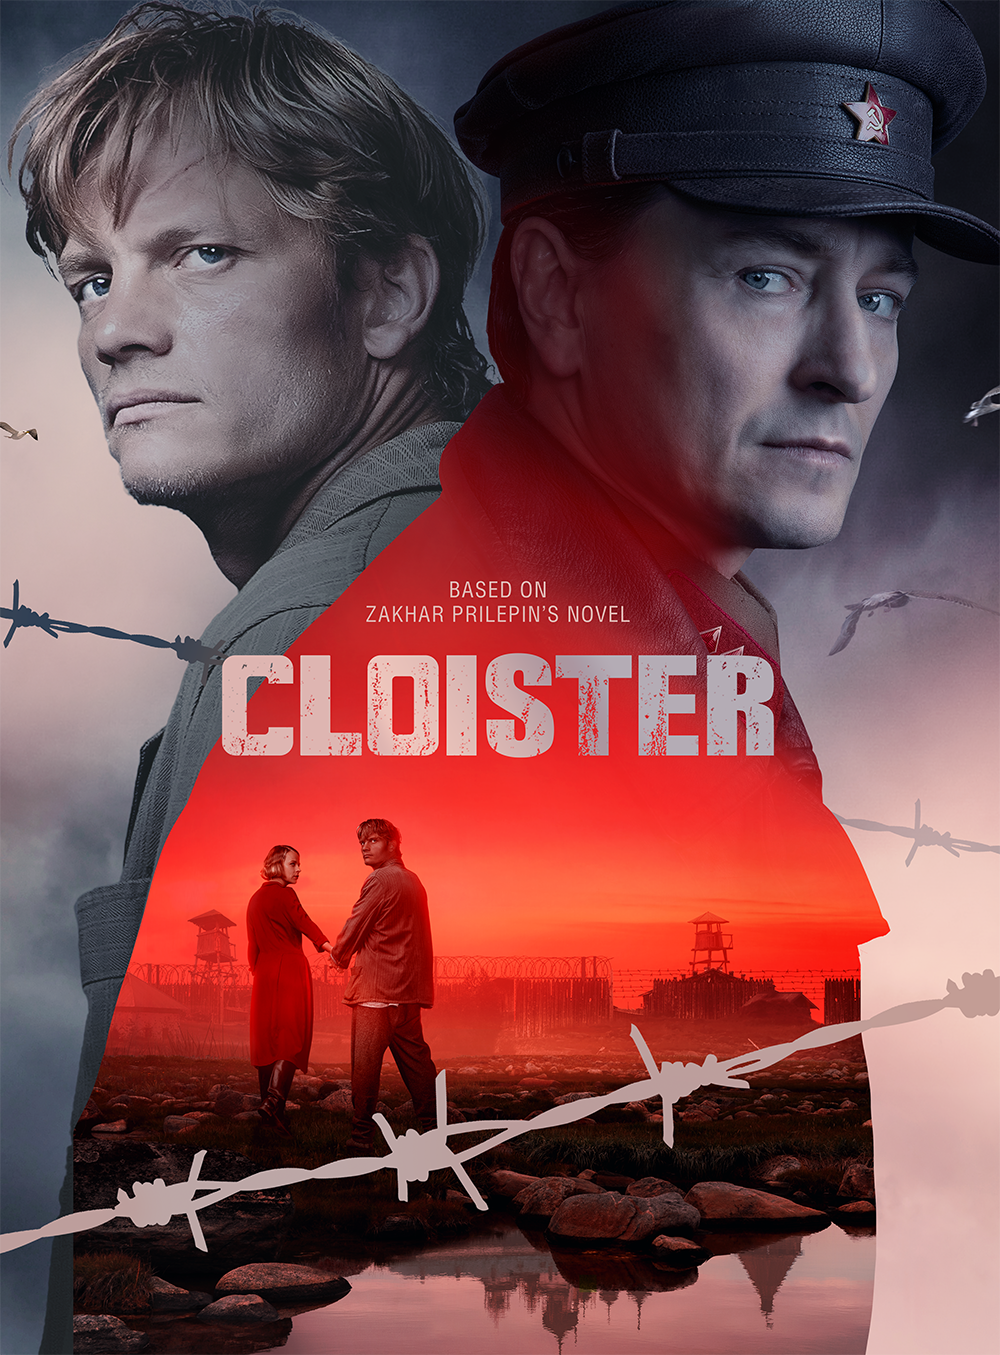 "CLOISTER" IS NOMINATED FOR THE VENICE TV AWARD